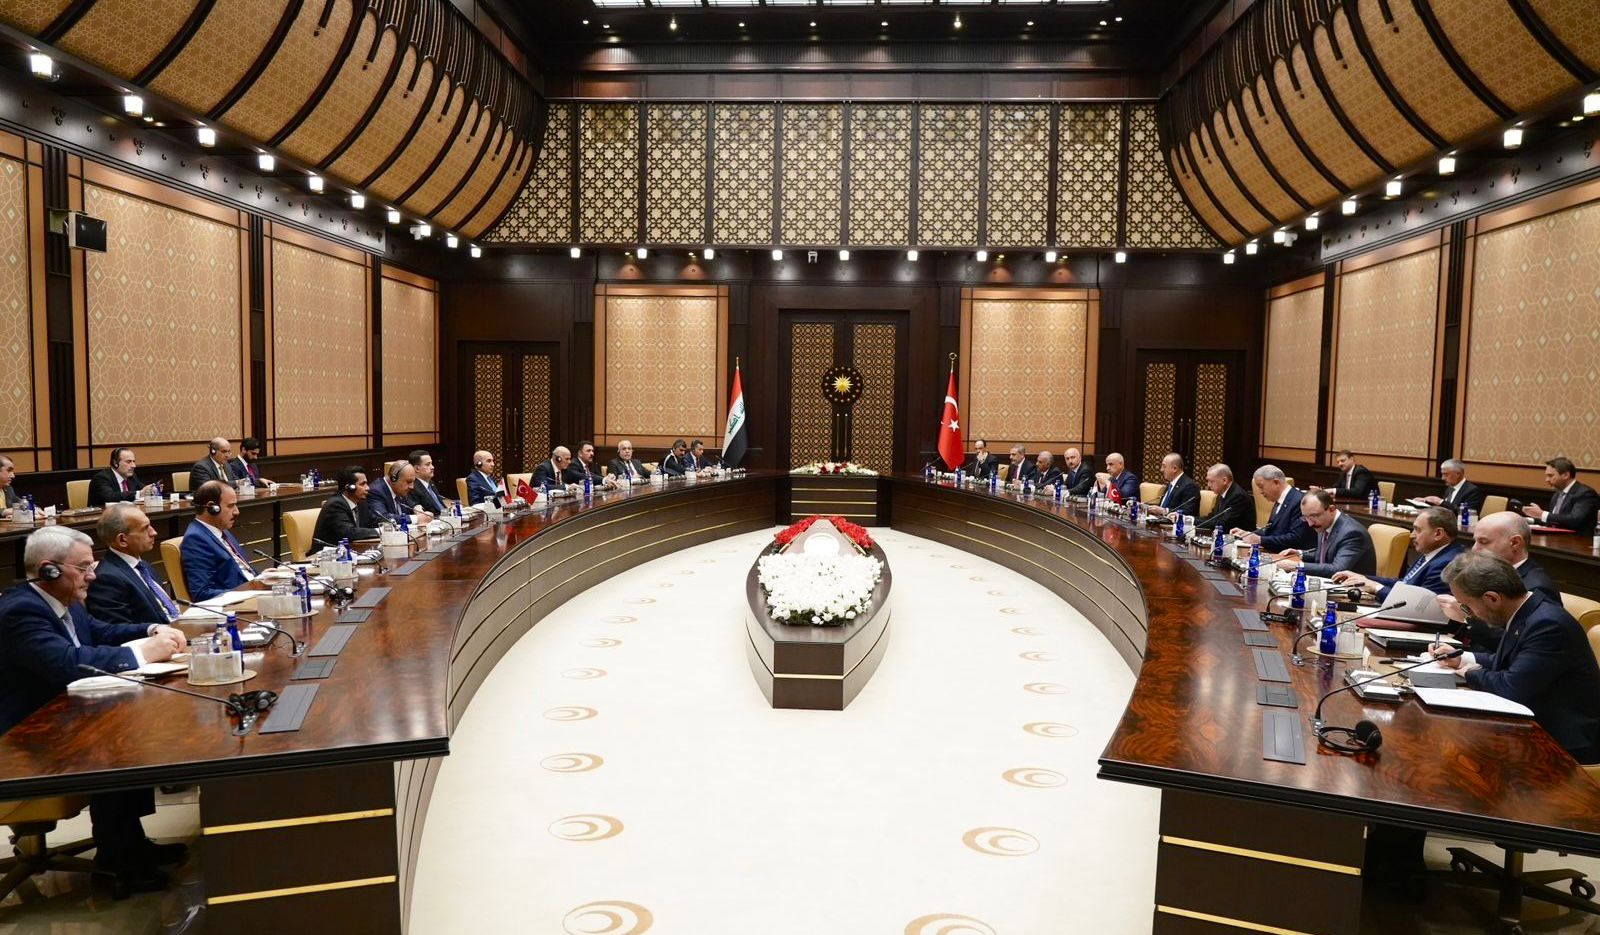 Iraqi premier holds expanded talks with Turkish officeholders in Ankara